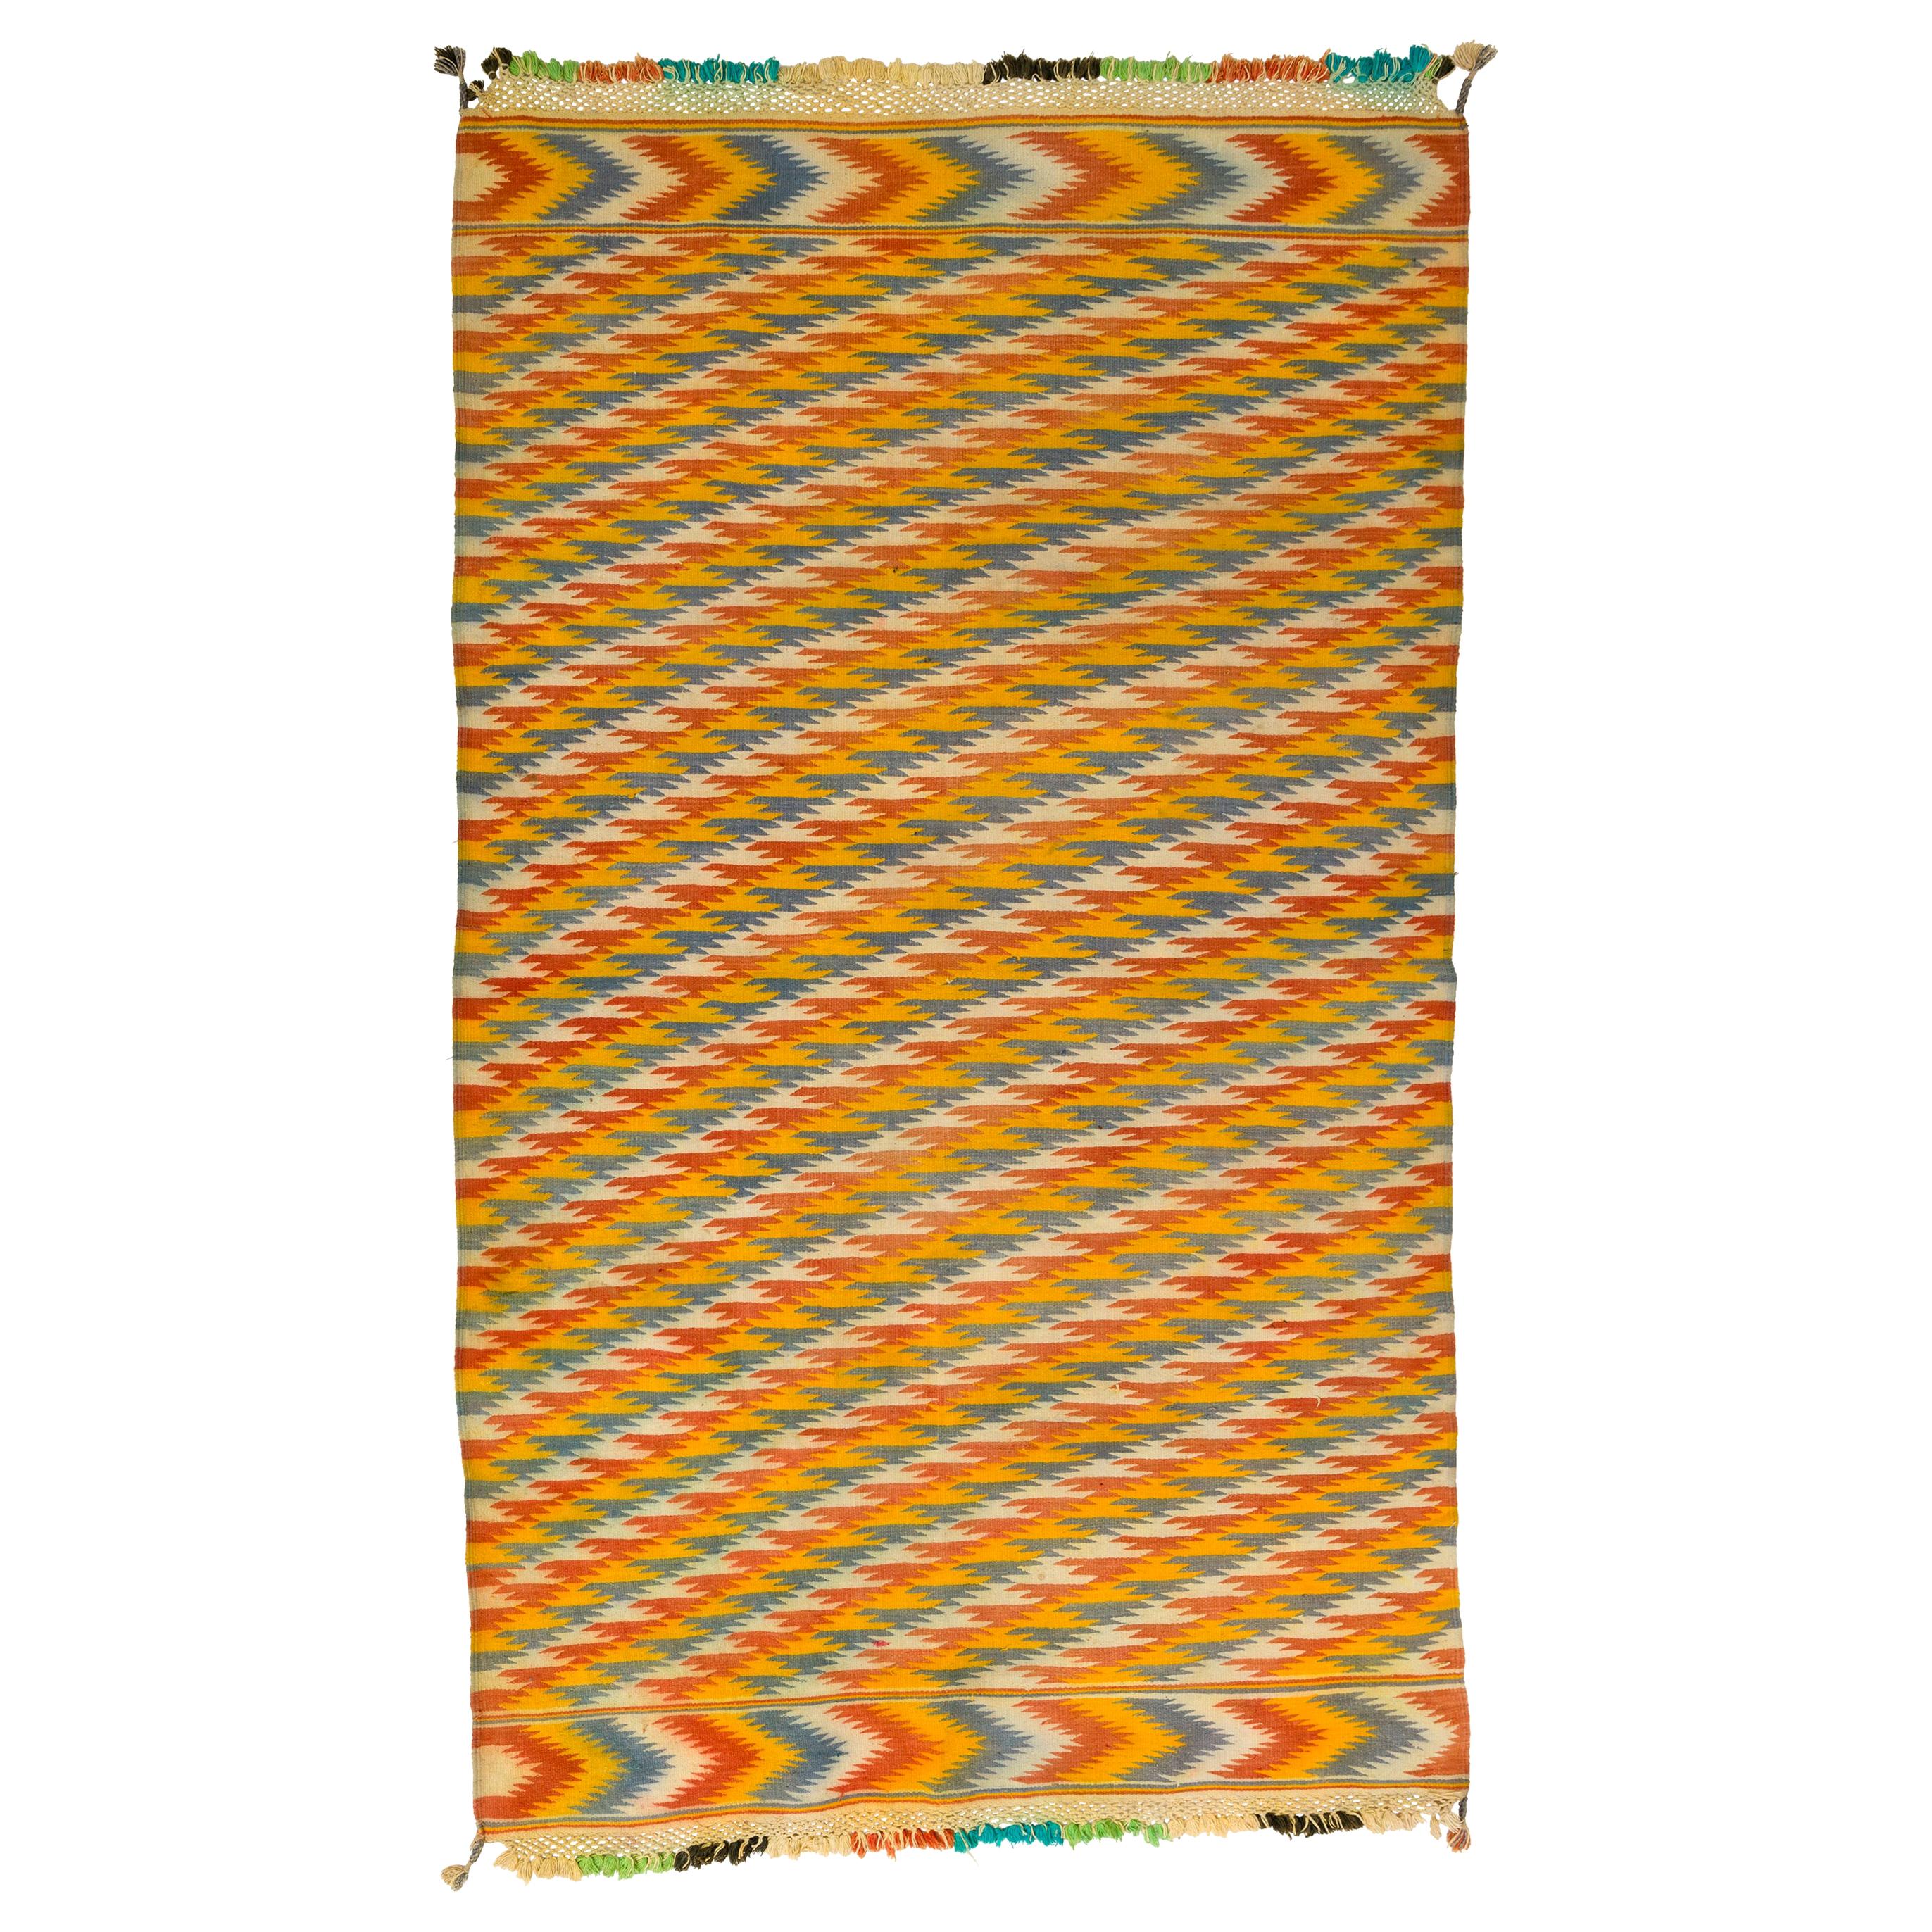 Tribal Blue and Yellow Chevron Pattern Rajasthani Indian Dhurrie Rug